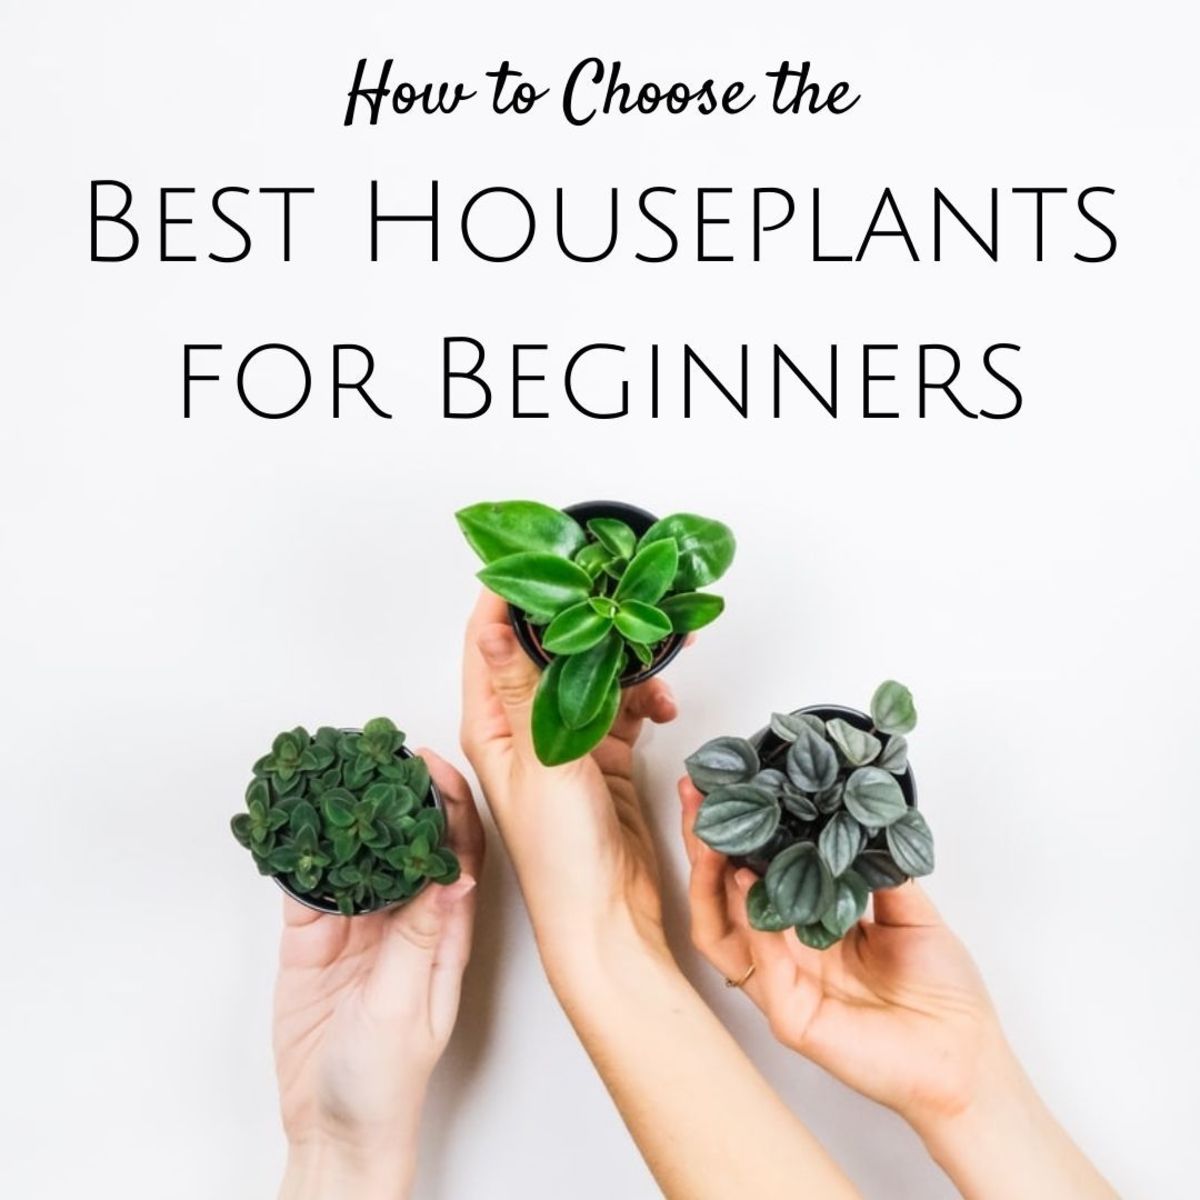 How to Choose the Best Houseplants for Beginners